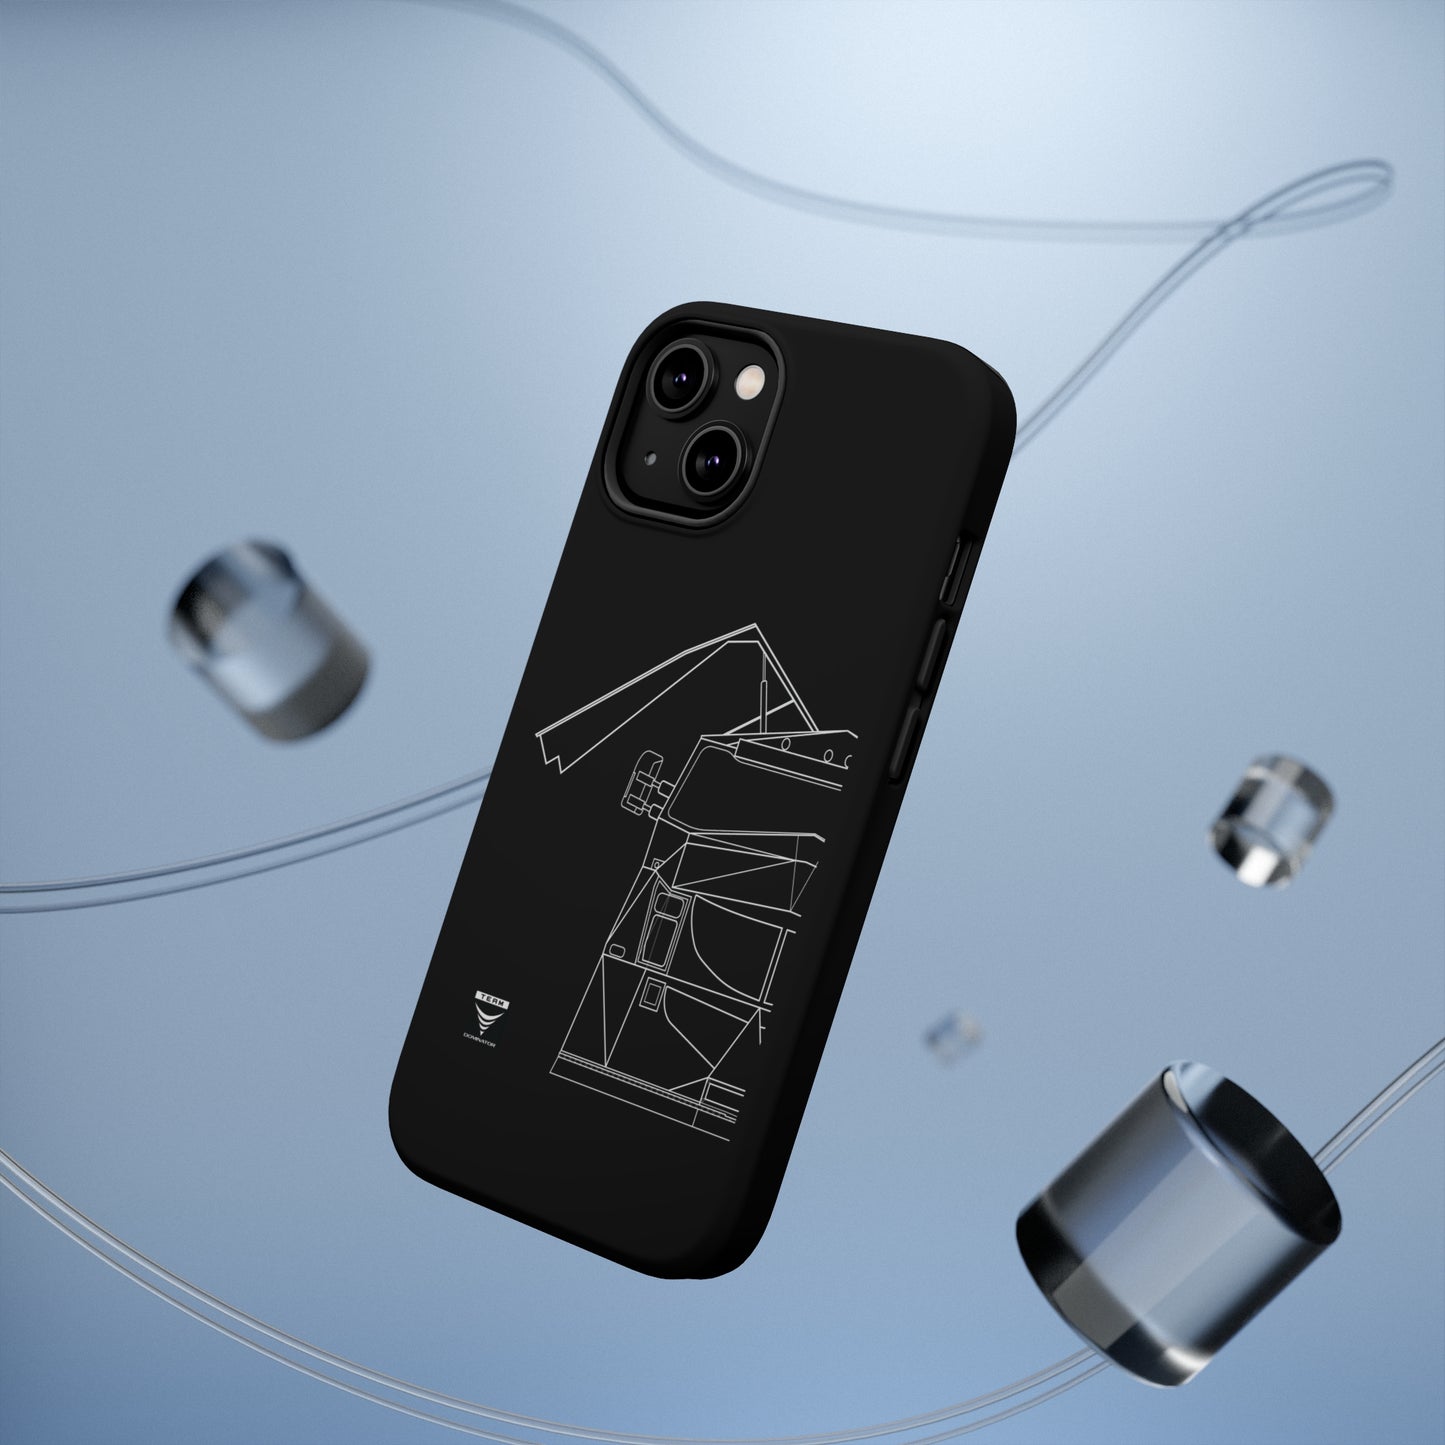 Dominator 3 Wireframe iPhone MagSafe Case - Never Stop Chasing